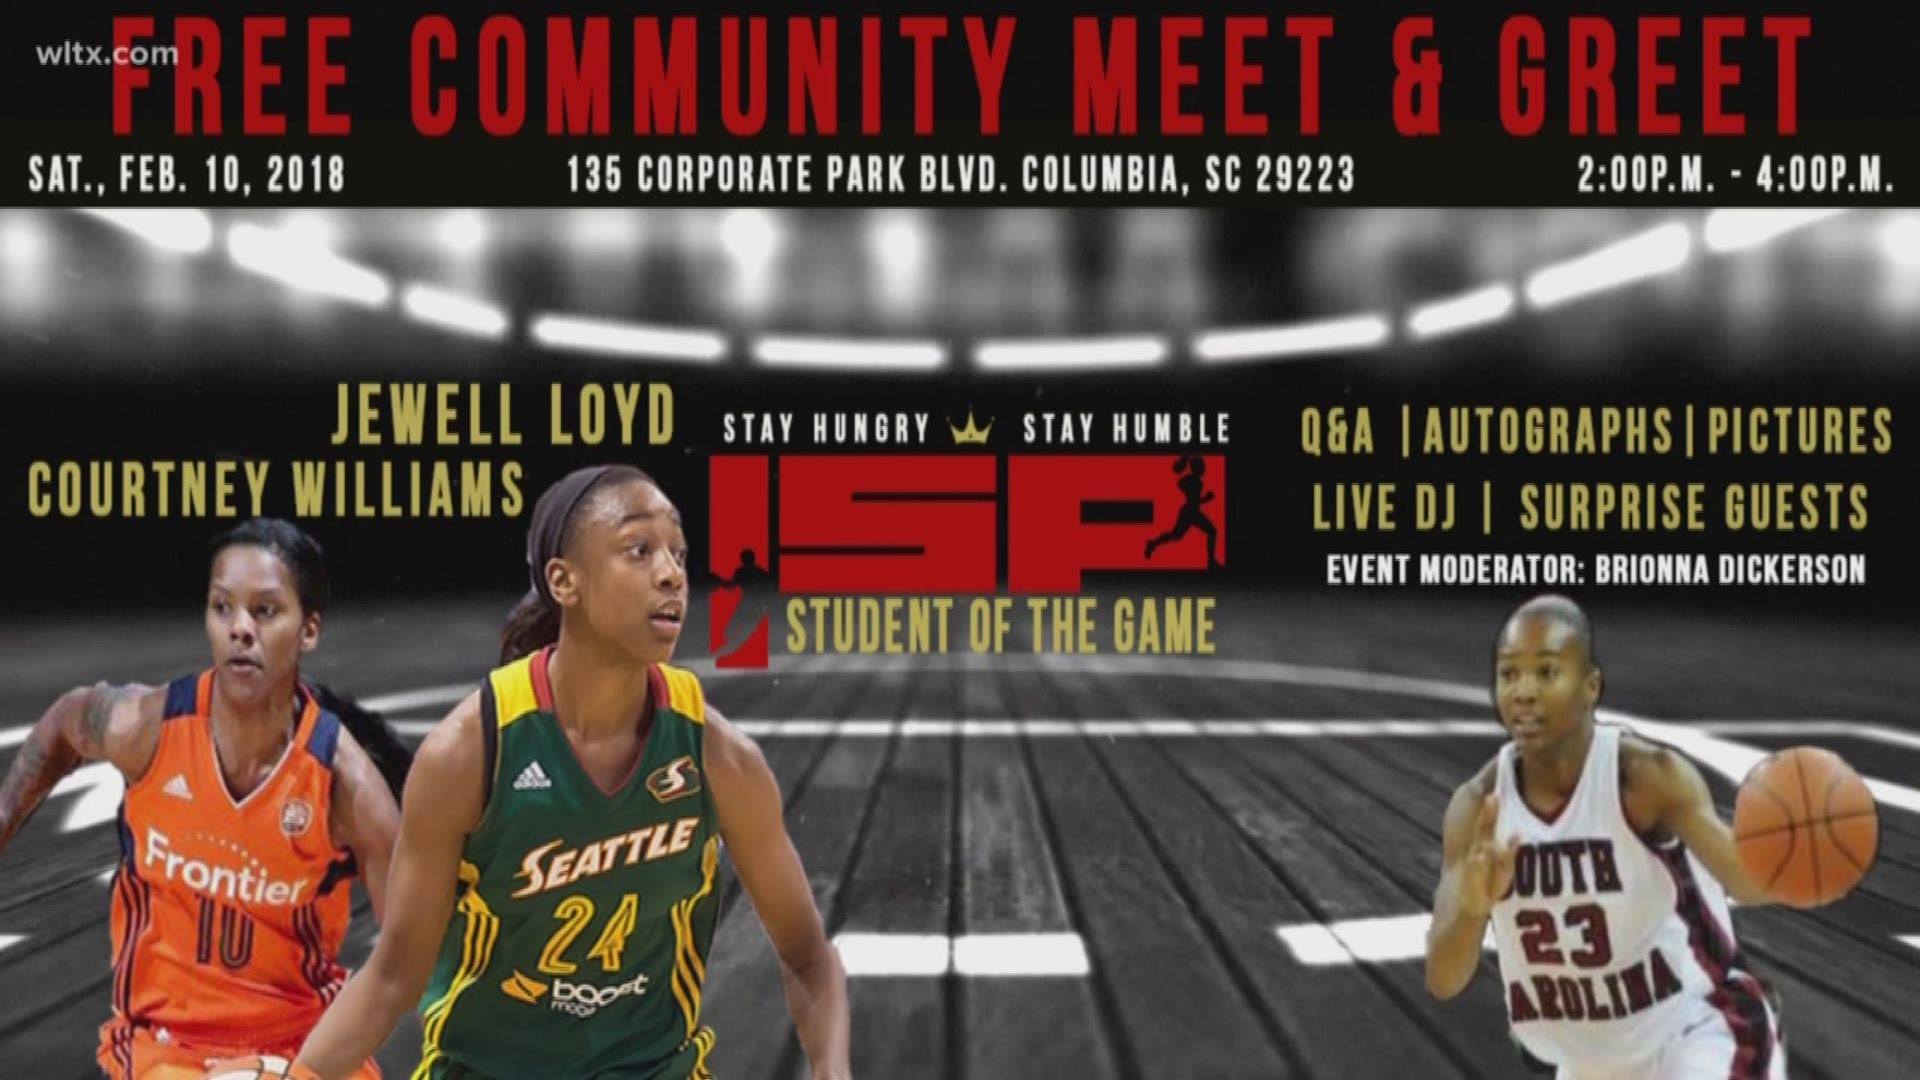 The USA Basketball Women's National Team will be conducting a training camp at USC this weekend. Iconic Sport Performance will be hosting a free meet and greet featuring Courtney Williams of the Connecticut Sun and Jewell Loyd if the Seattle Storm. 